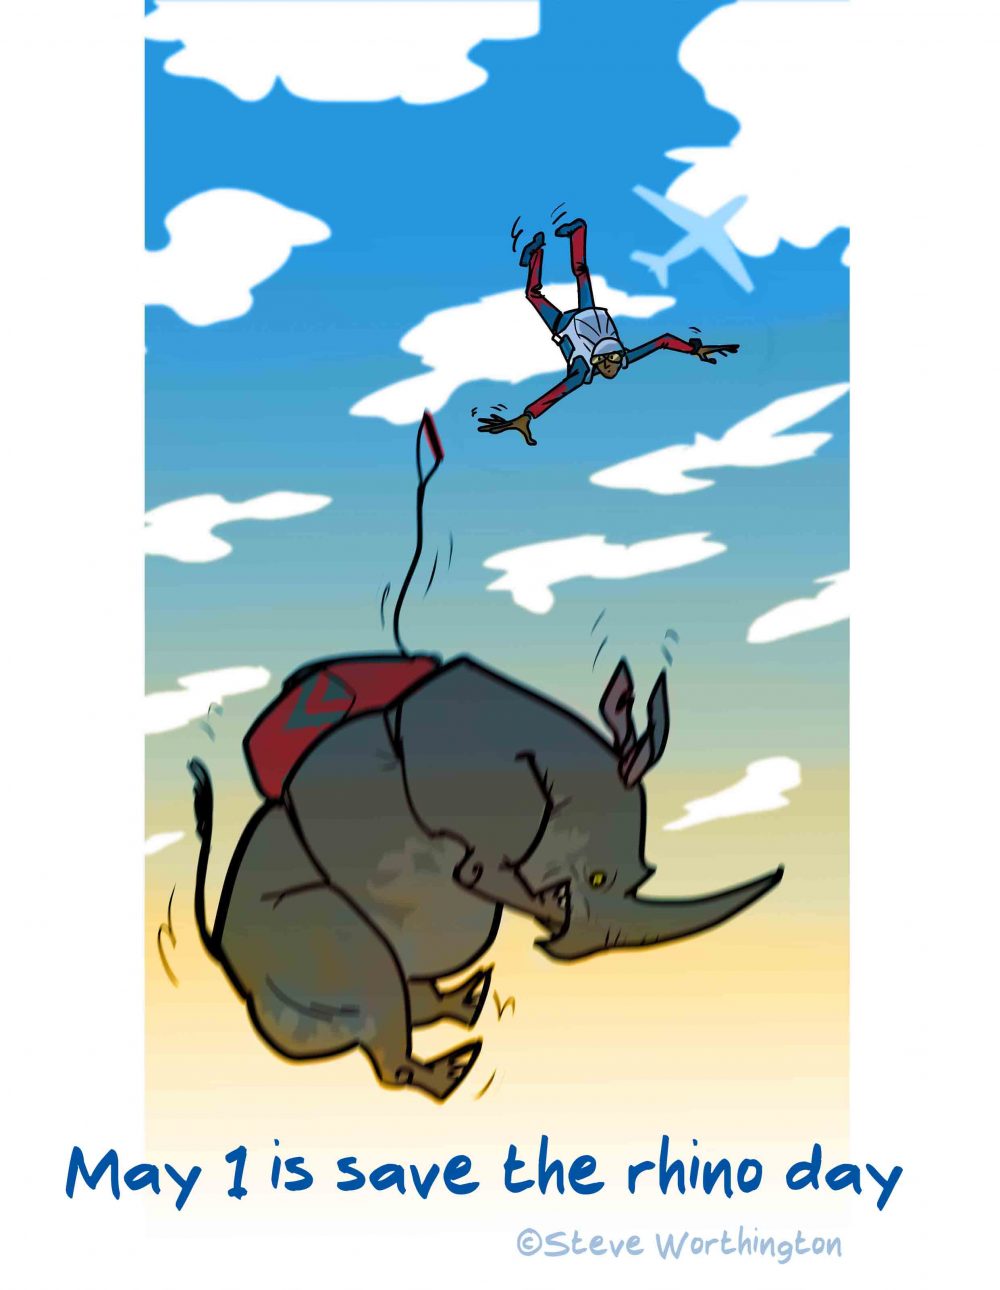 Color illustration celebrating save the rhino day. A skydiver chases a rhino through the air.